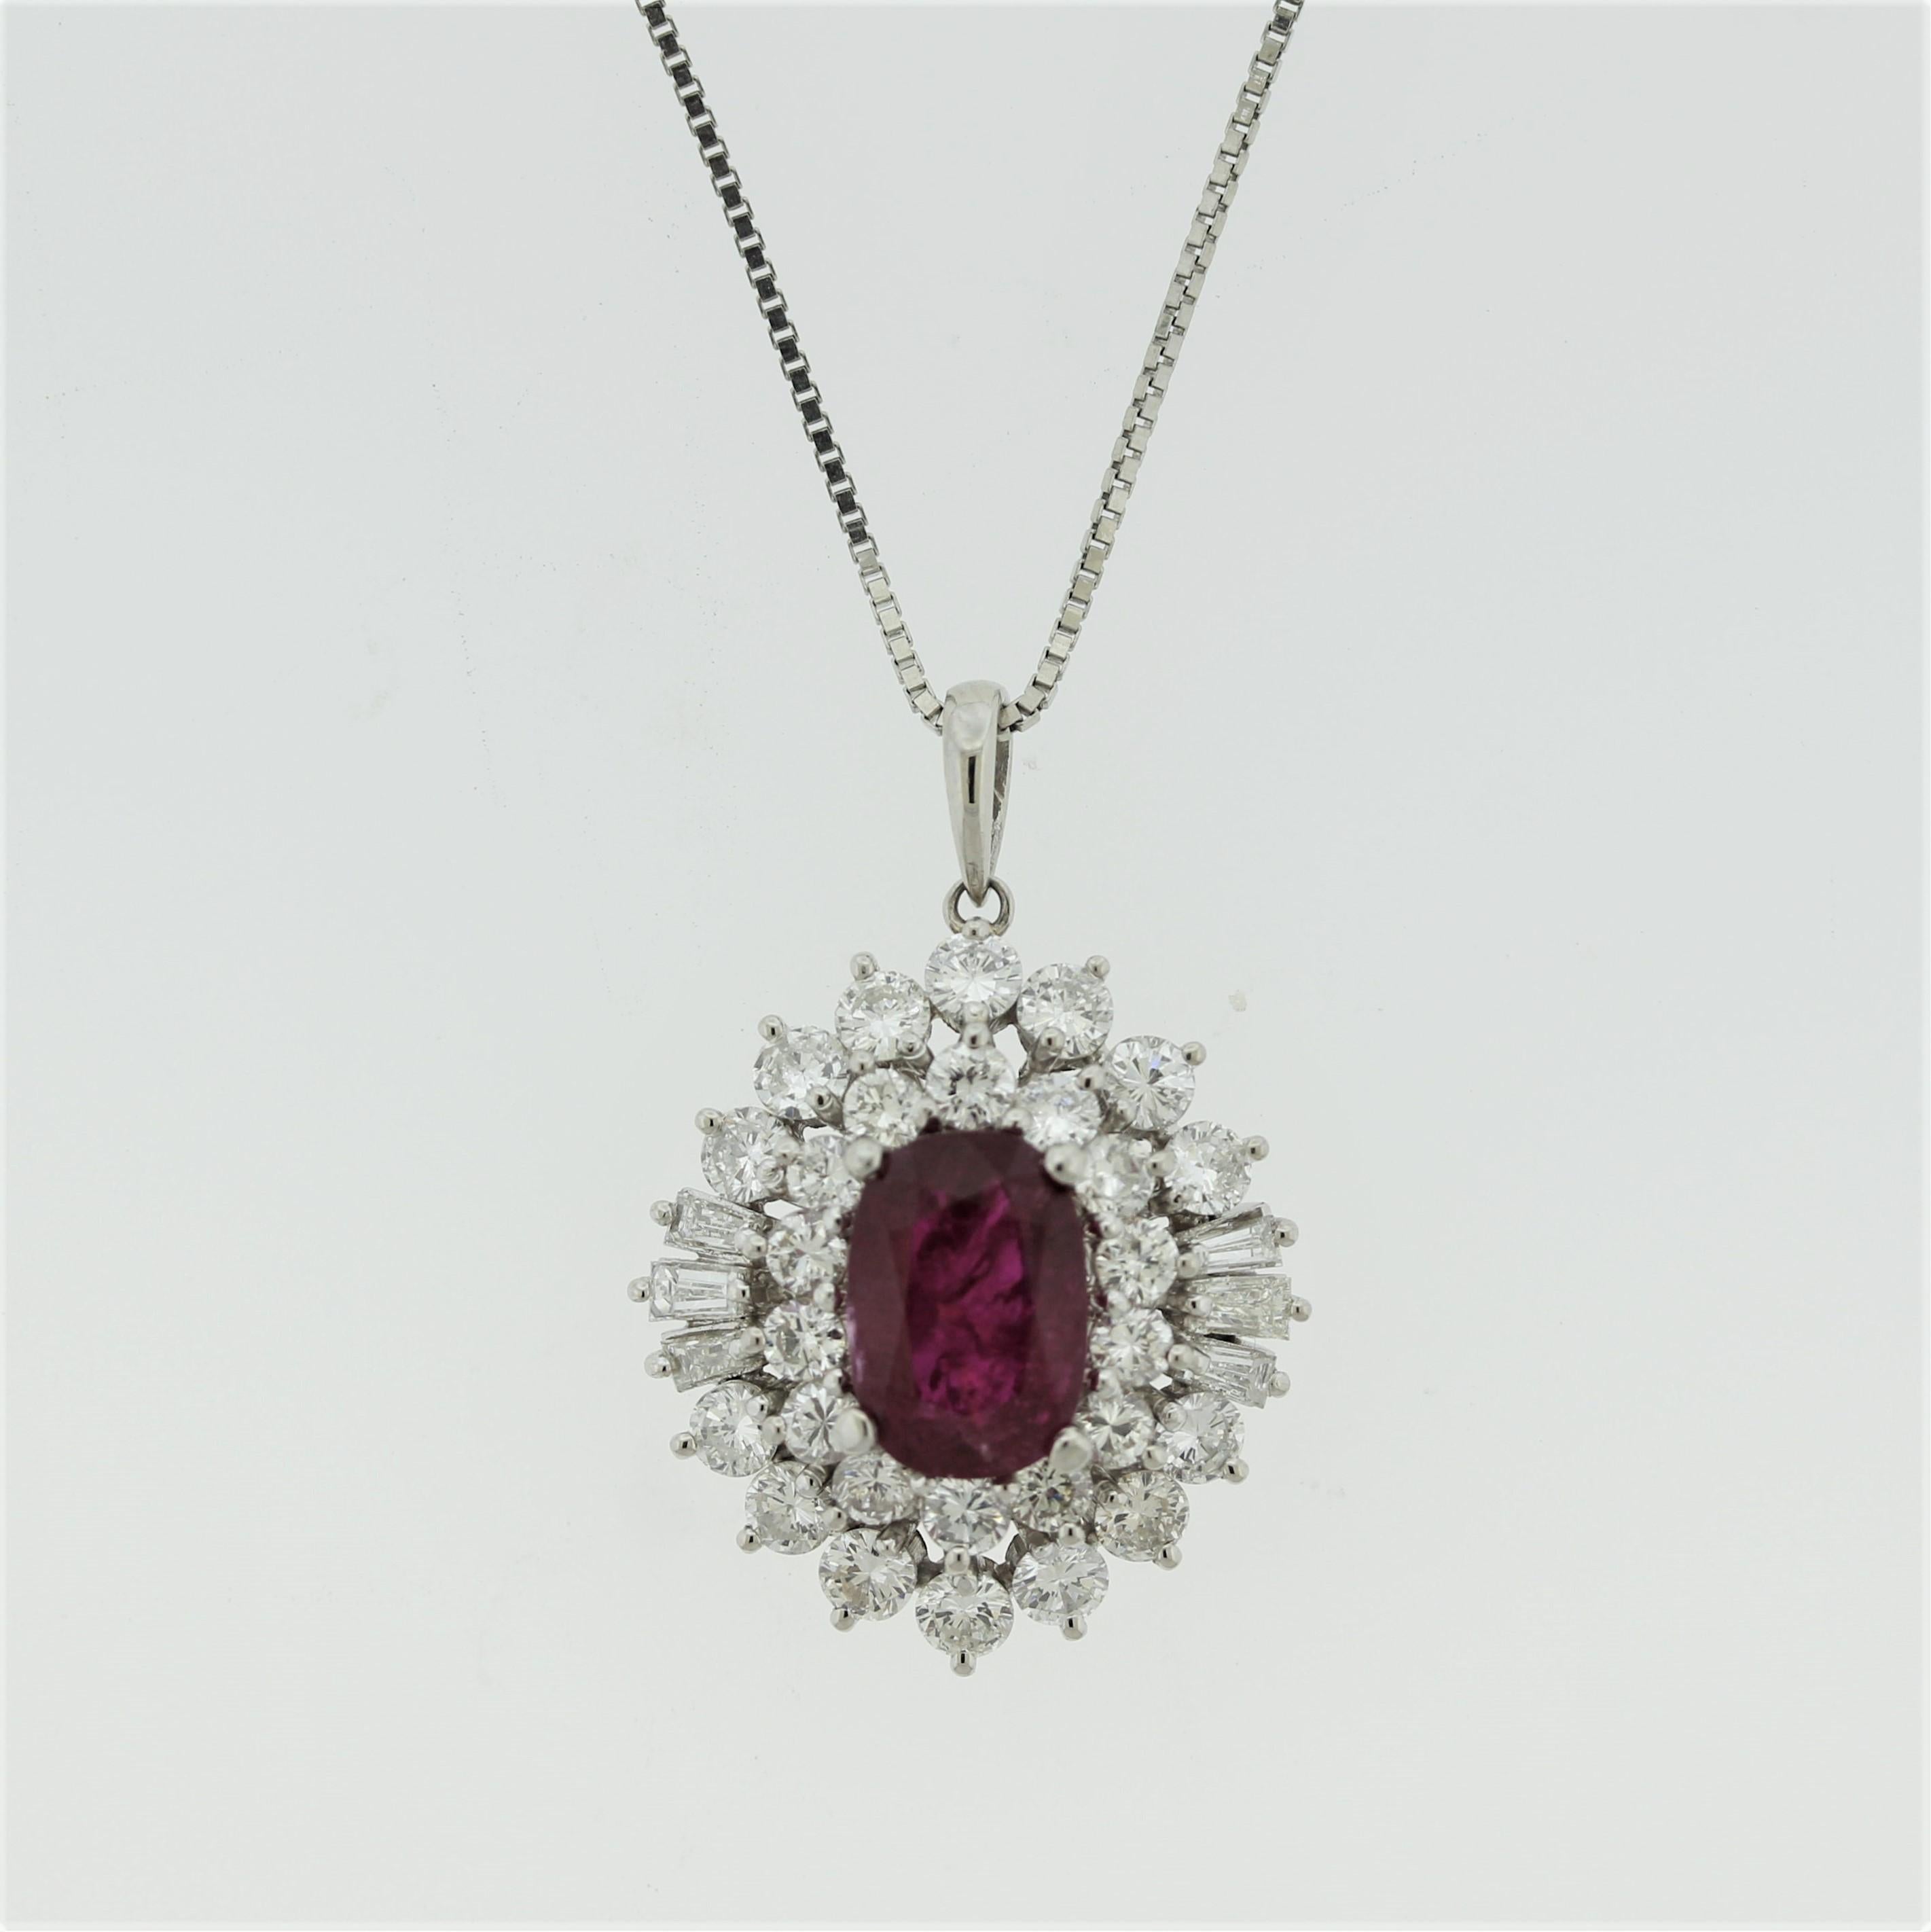 A dazzling pendant featuring a large 3.12 carat oval-shape ruby which has a rich intense red color. It is accented by a spray of large round brilliant-cut and baguette-cut diamonds creating a sunburst design around the ruby. The diamonds are of top